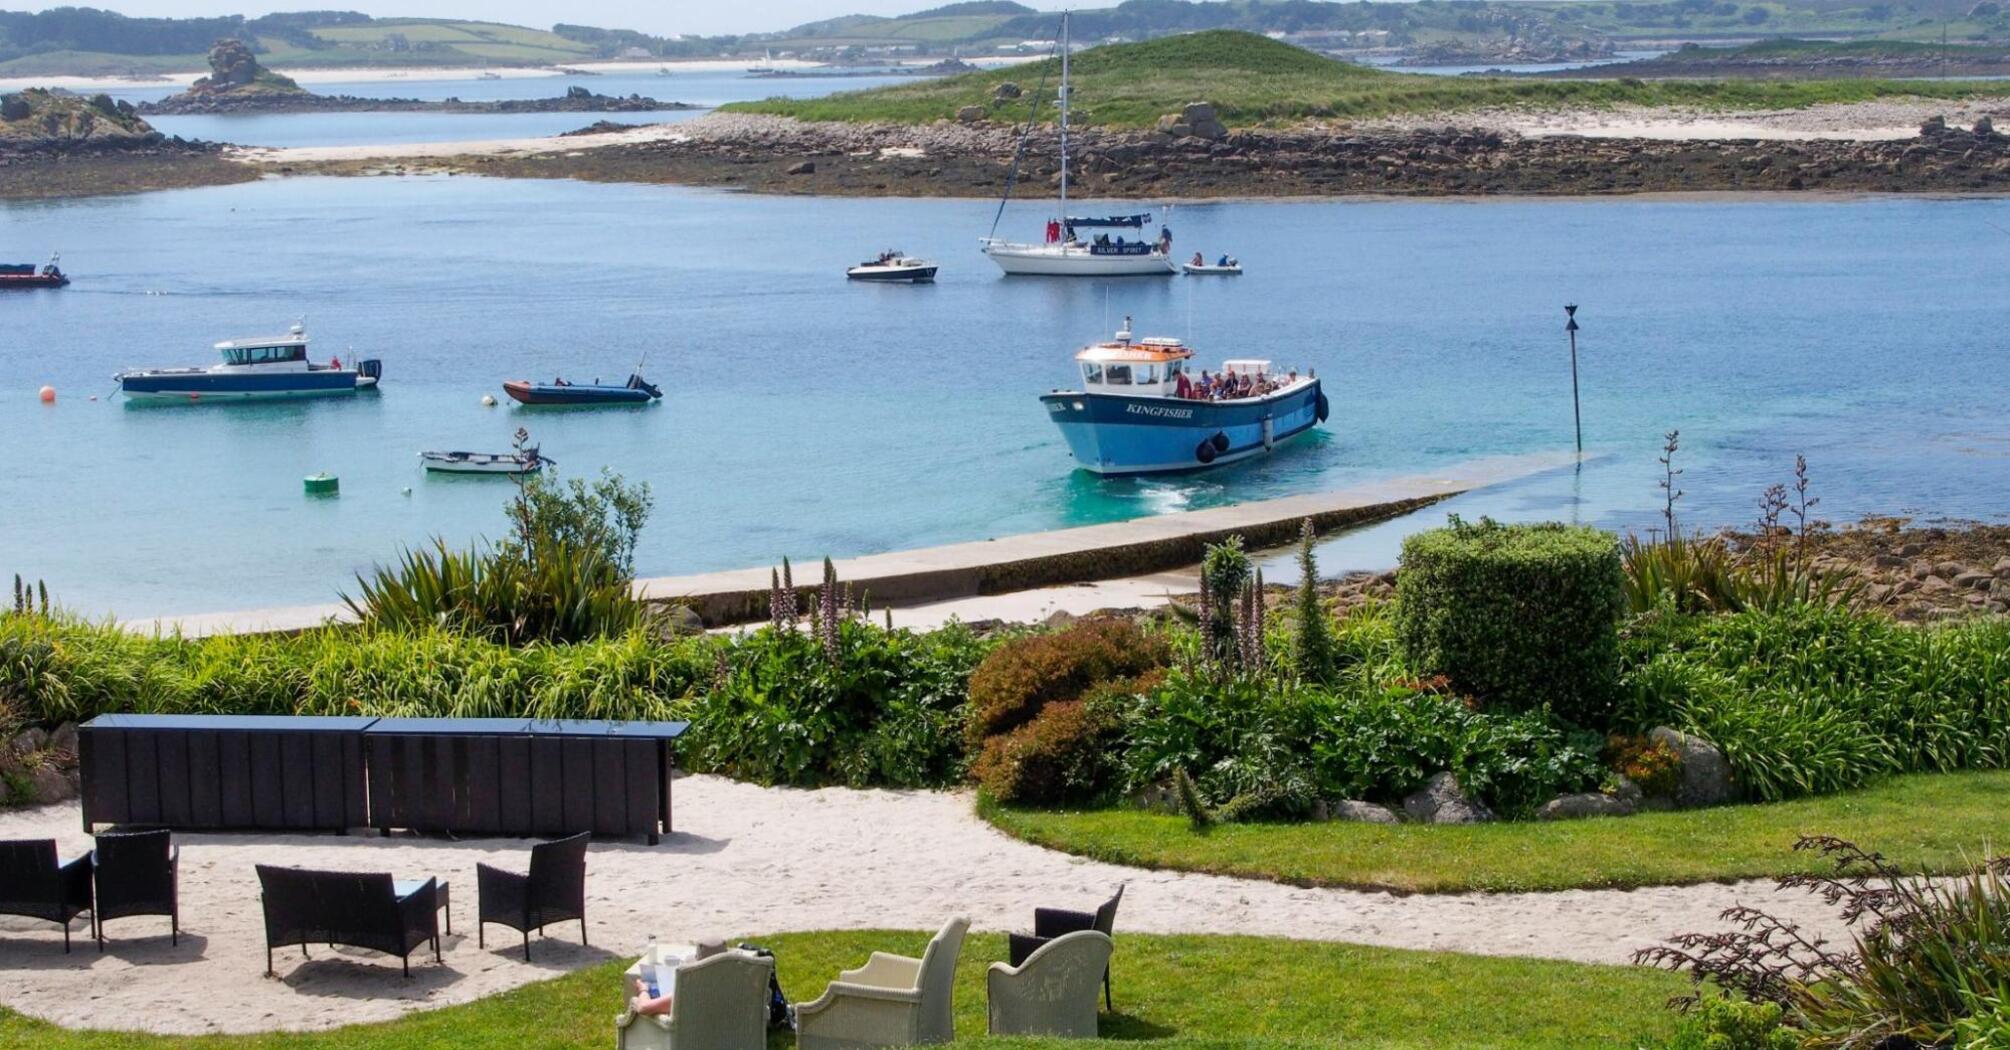 The view of St Martin's, Isles of Scilly, United Kingdom